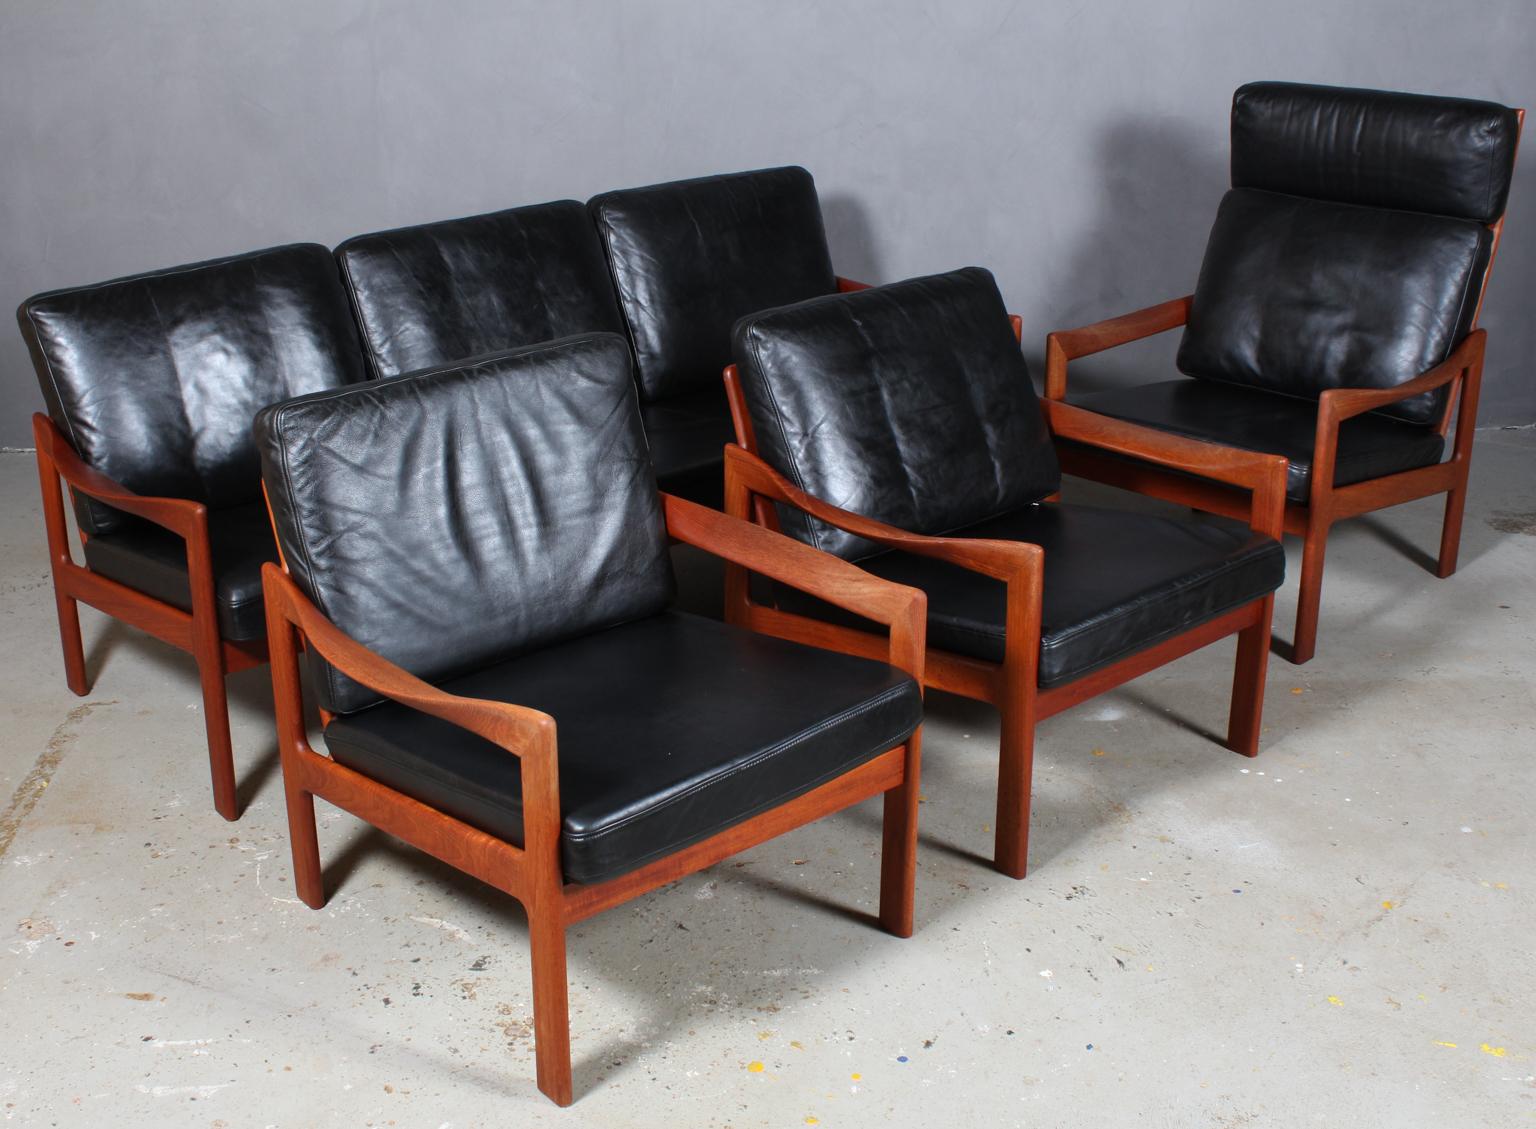 Illum Wikkelsø living room set consisting of three seater sofa, one highback chair  Cushions original upholstered with black patinated leather.

Frame of teak.

Model 20, made by N. Eilersen, 1960s.

Possible to buy seperate as well.

LOW BACK